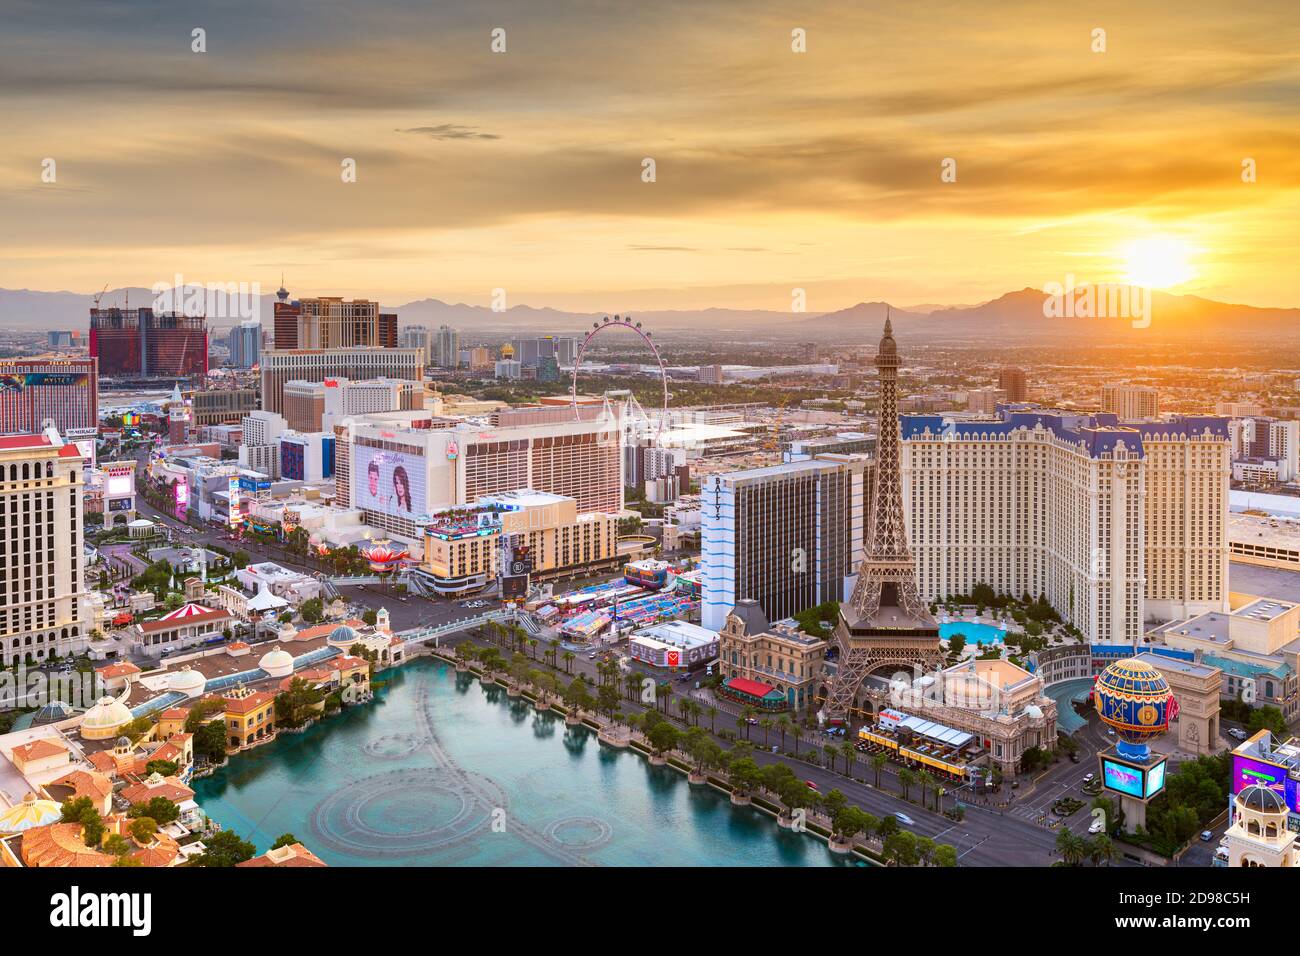 LAS VEGAS, NEVADA - APRIL 19, 2018: Hotels and Casinos along the strip at dusk. Stock Photo